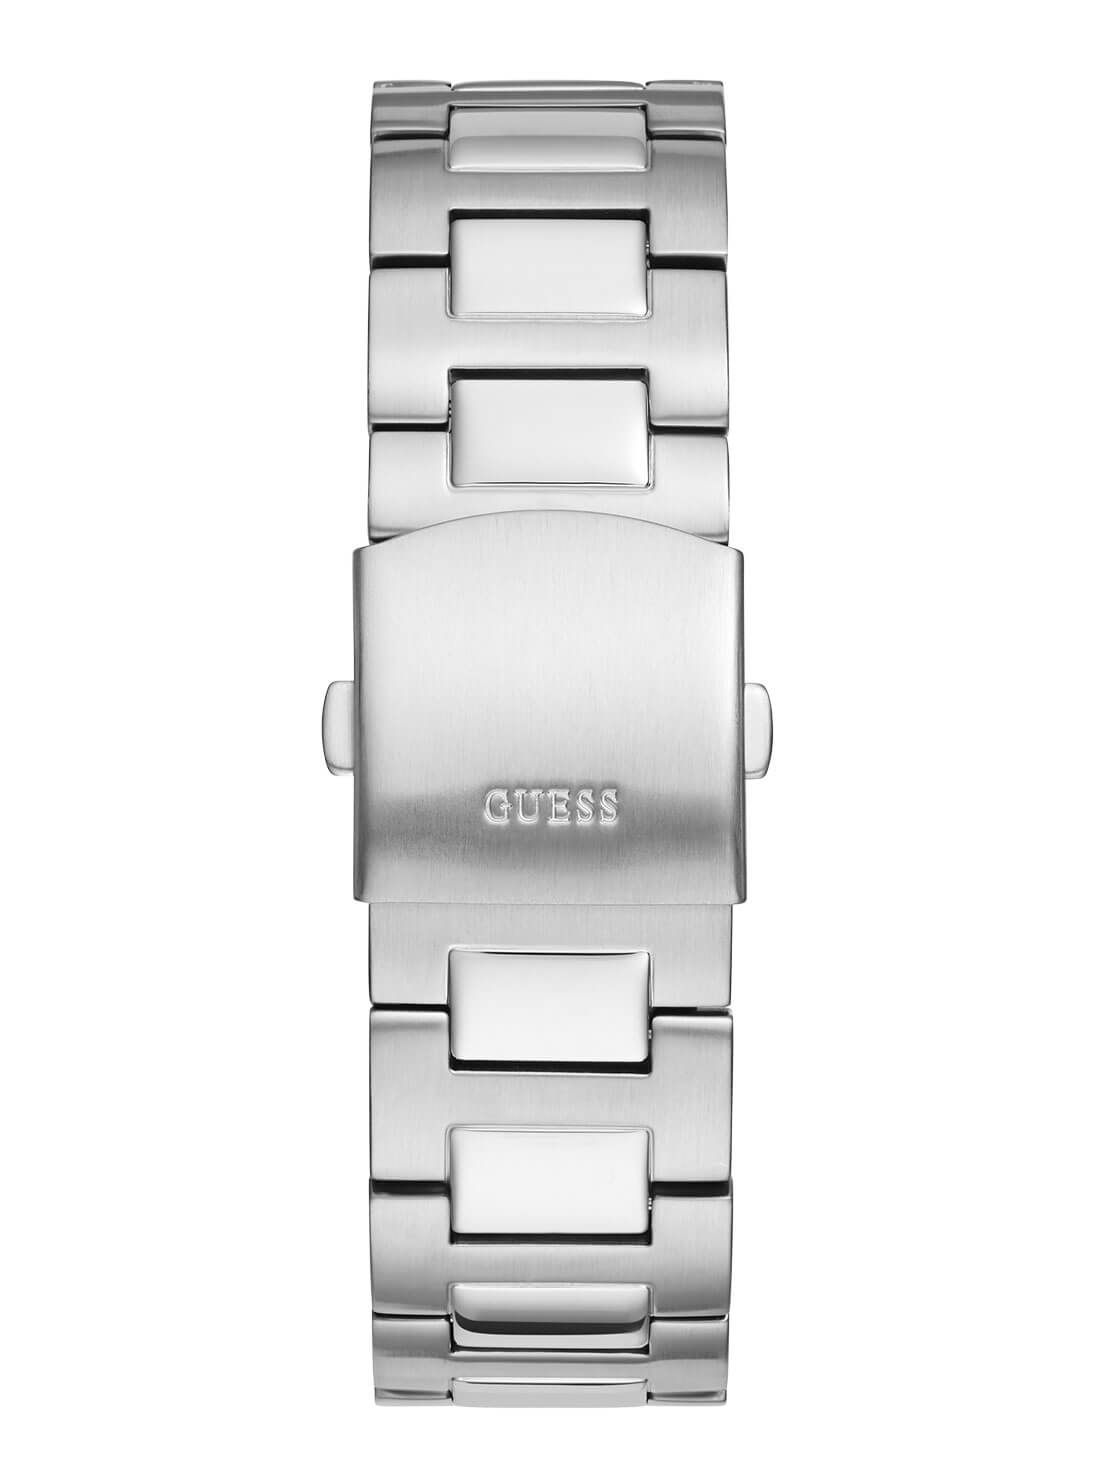 GUESS Mens Silver Track Watch GW0426G1 Back View